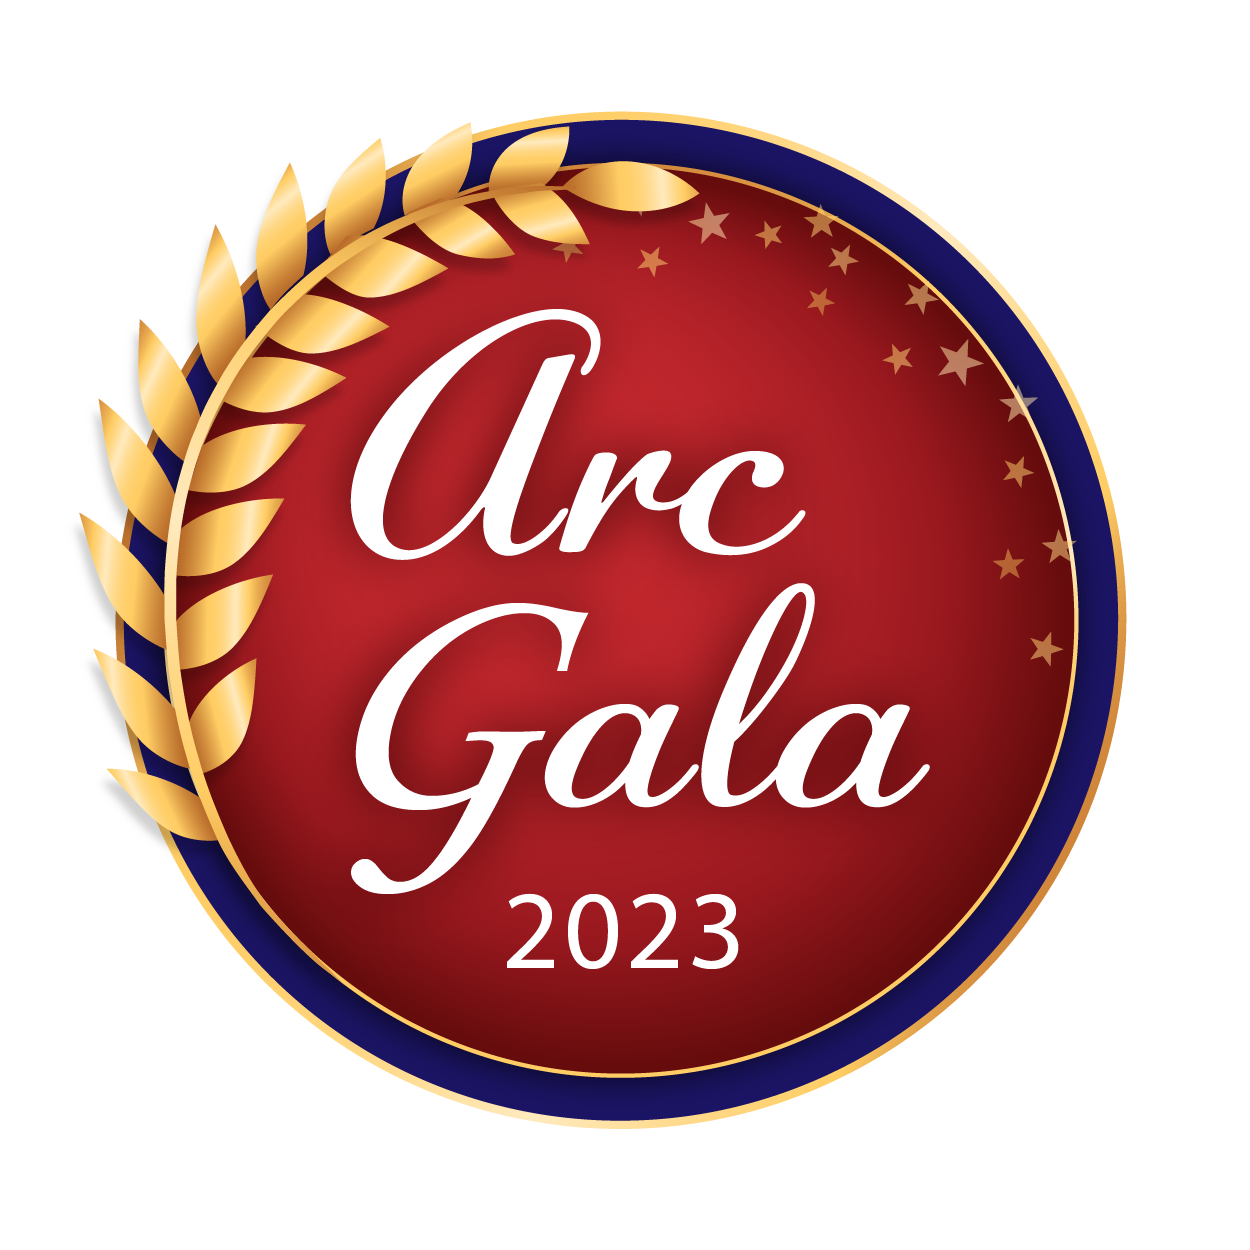 the 2023 Arc gala logo. It is a red circle outlined with blue and gold. There are stars and laurels framing it.